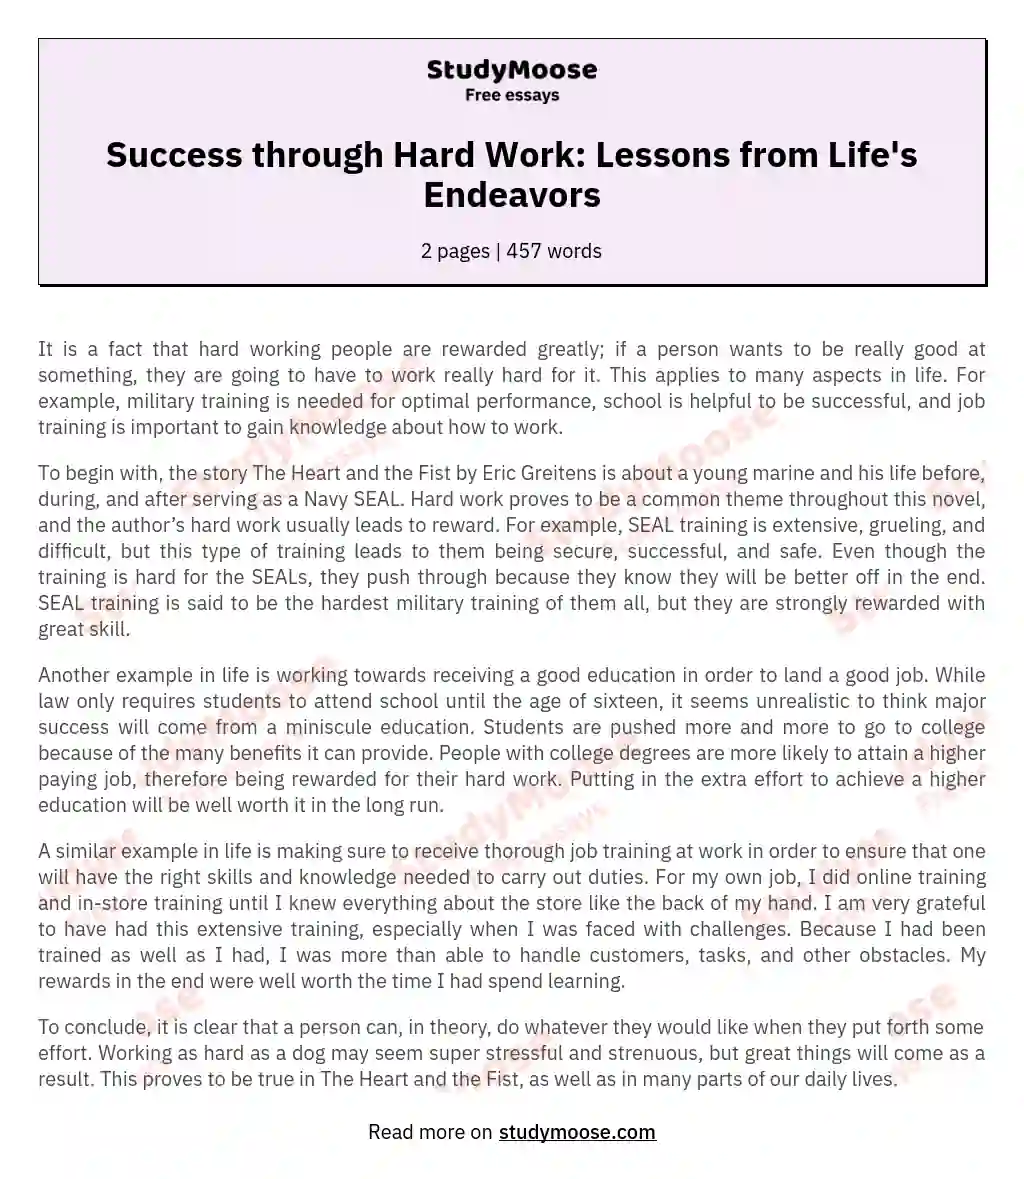 Success through Hard Work: Lessons from Life's Endeavors essay